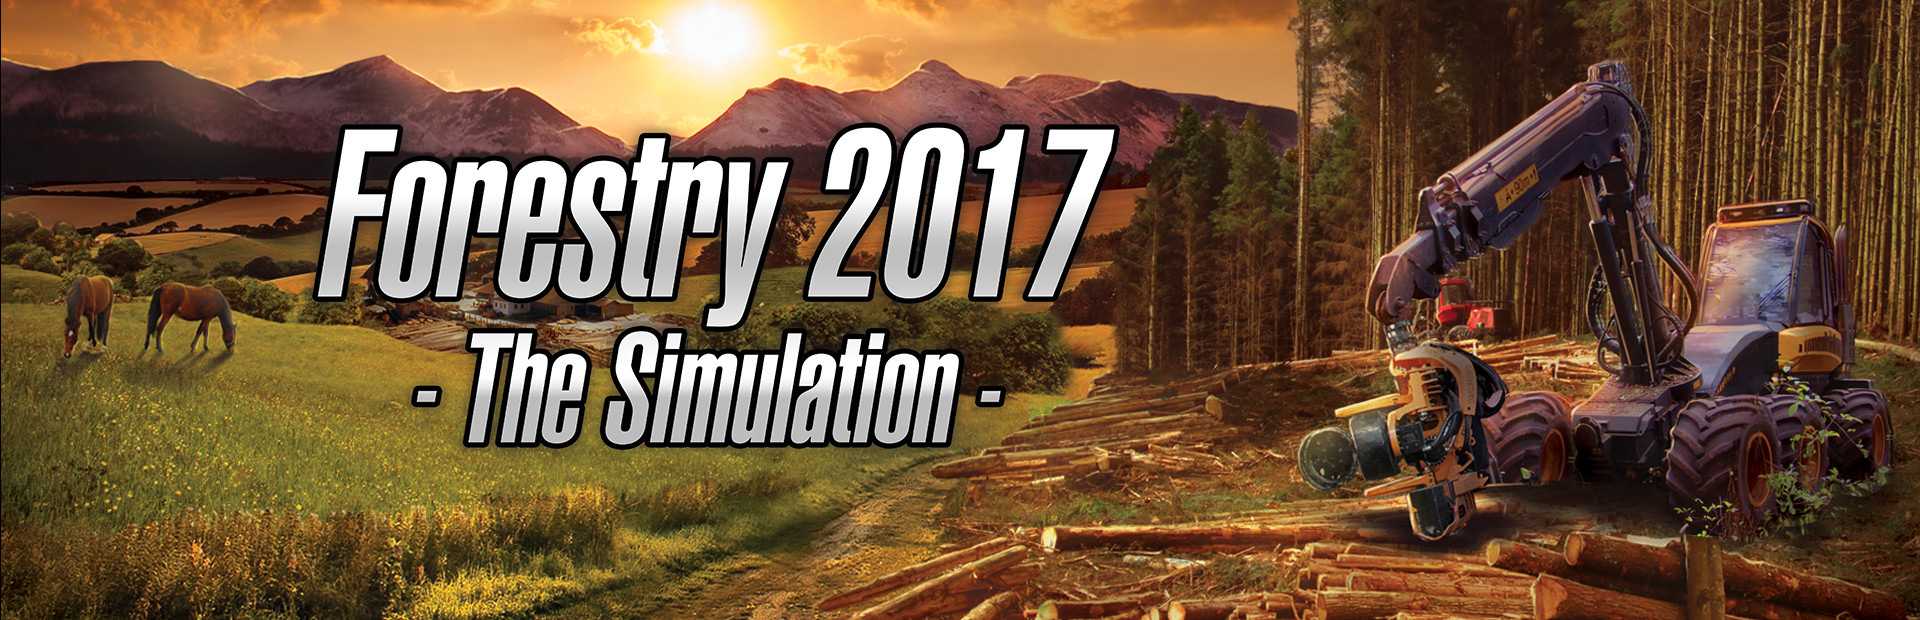 Forestry 2017 - The Simulation cover image